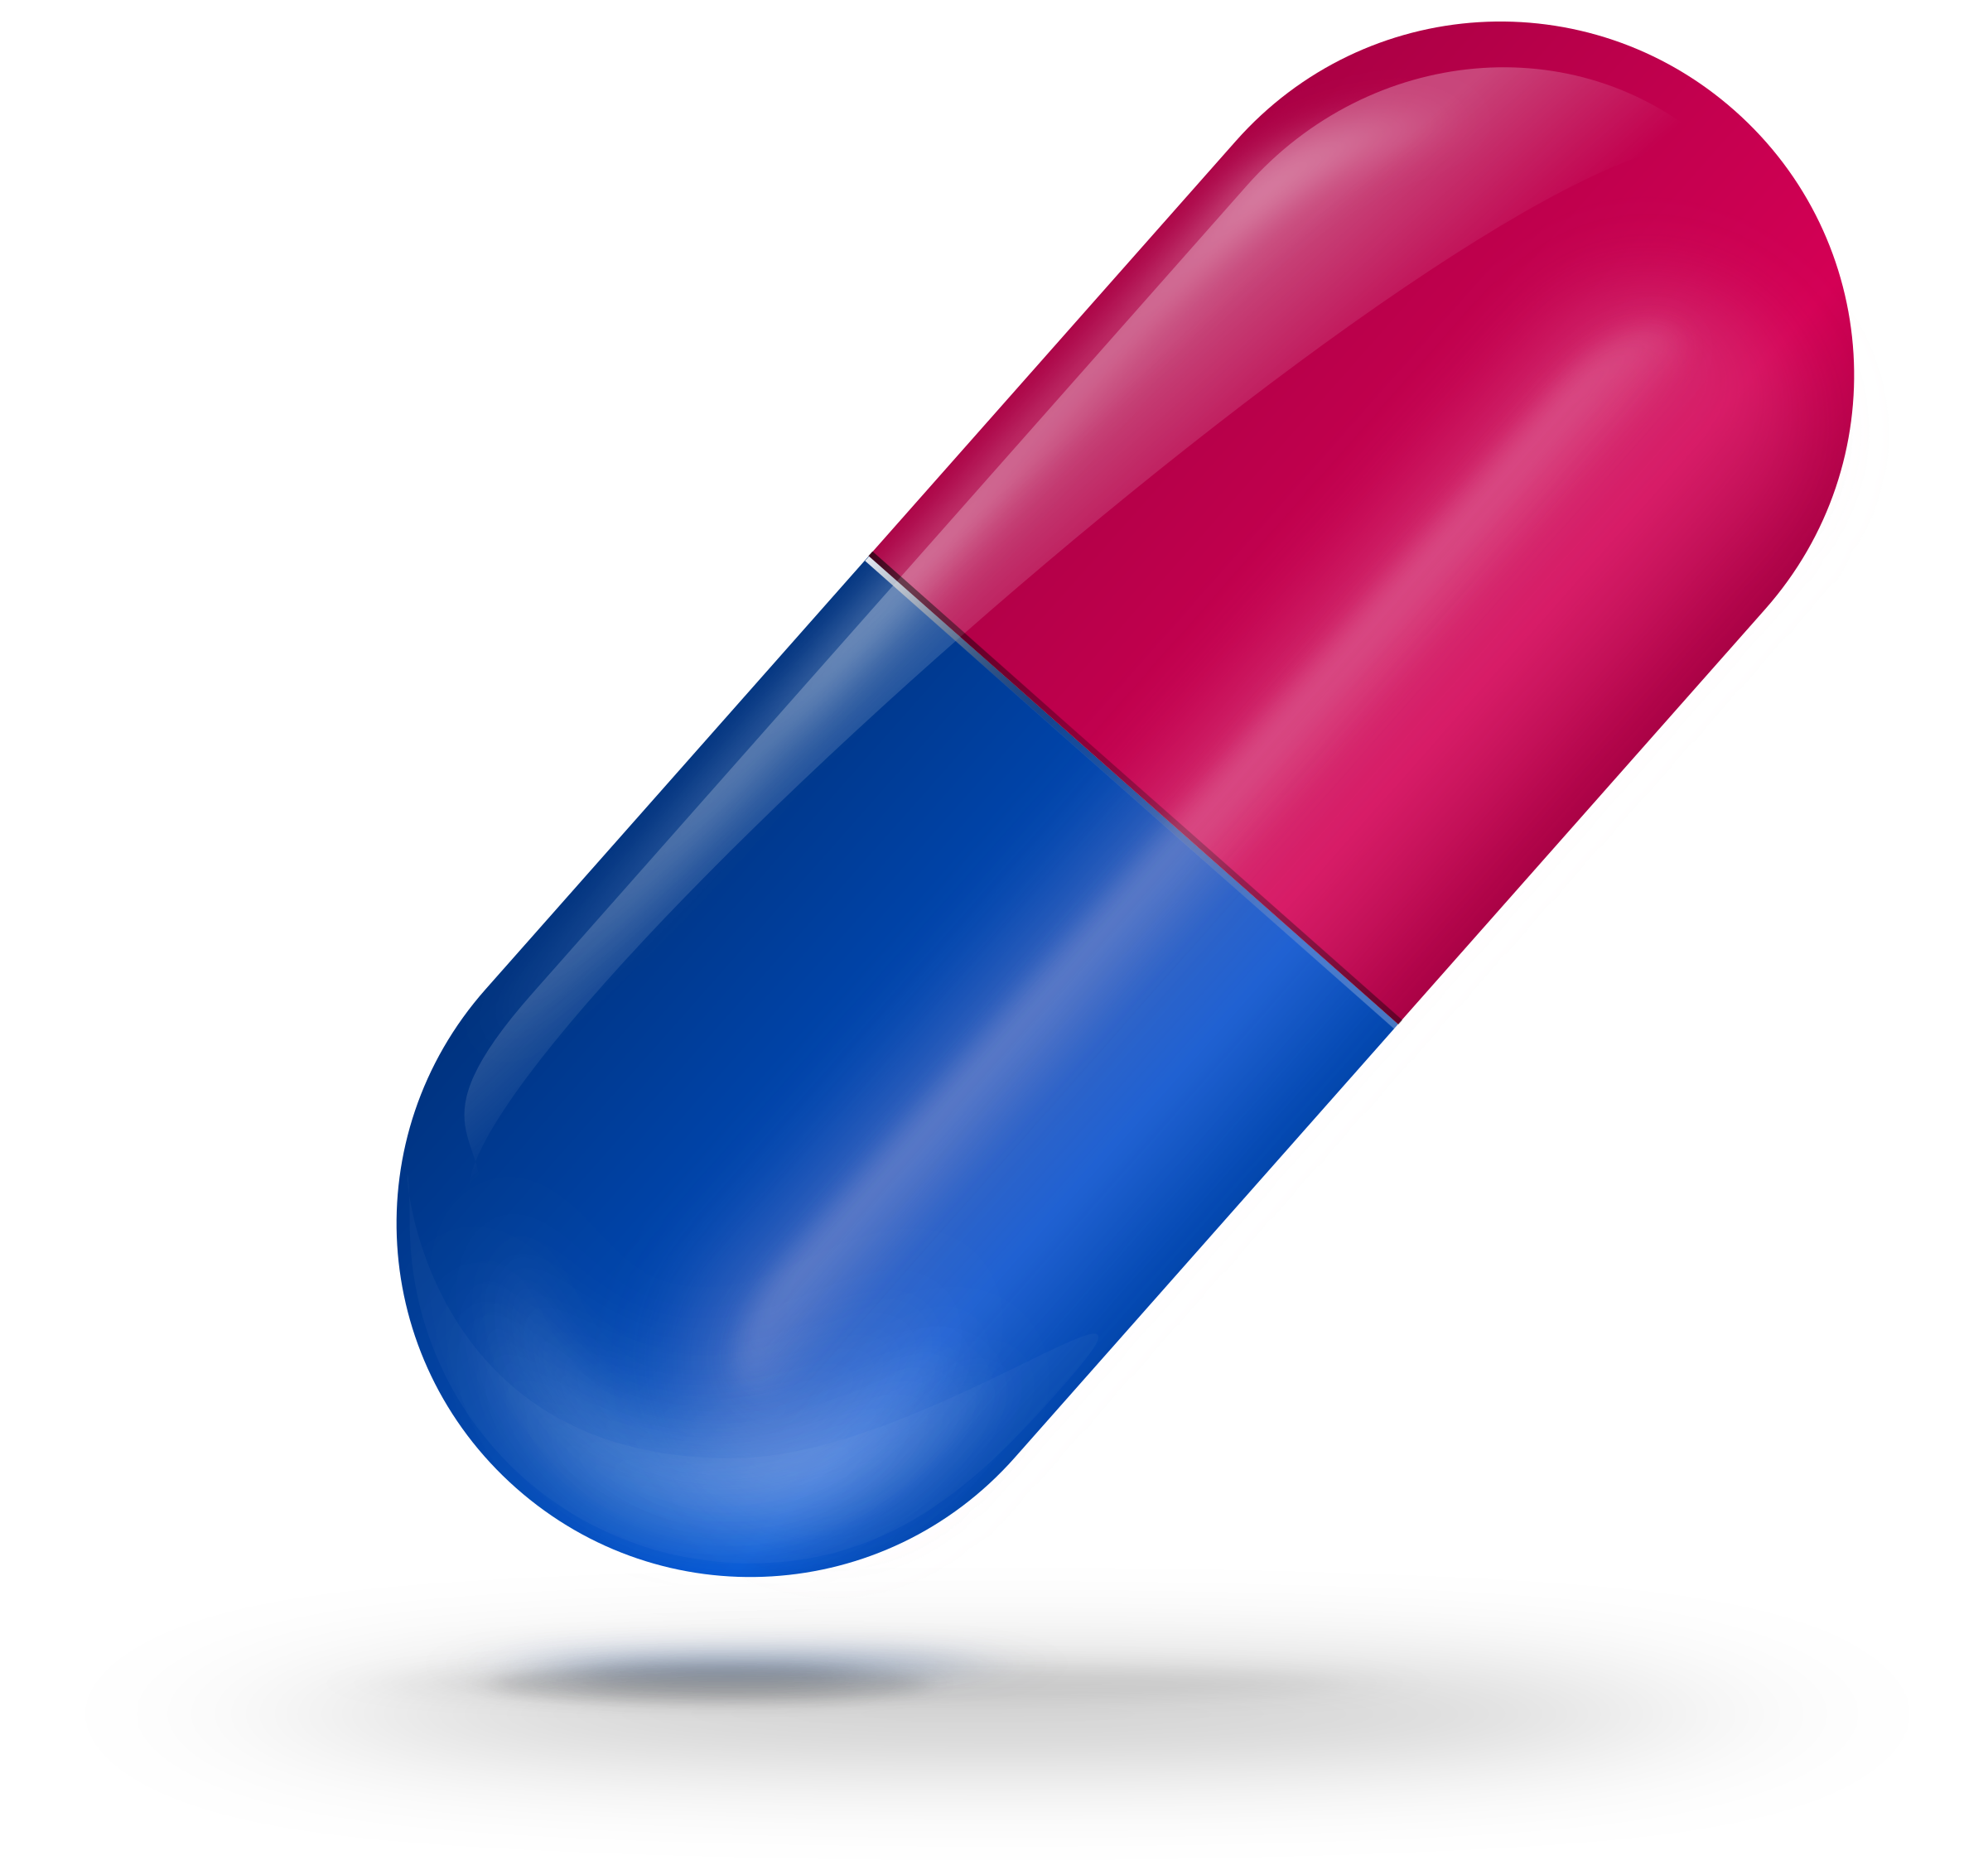 Capsule big image png. Pharmacist clipart pill container